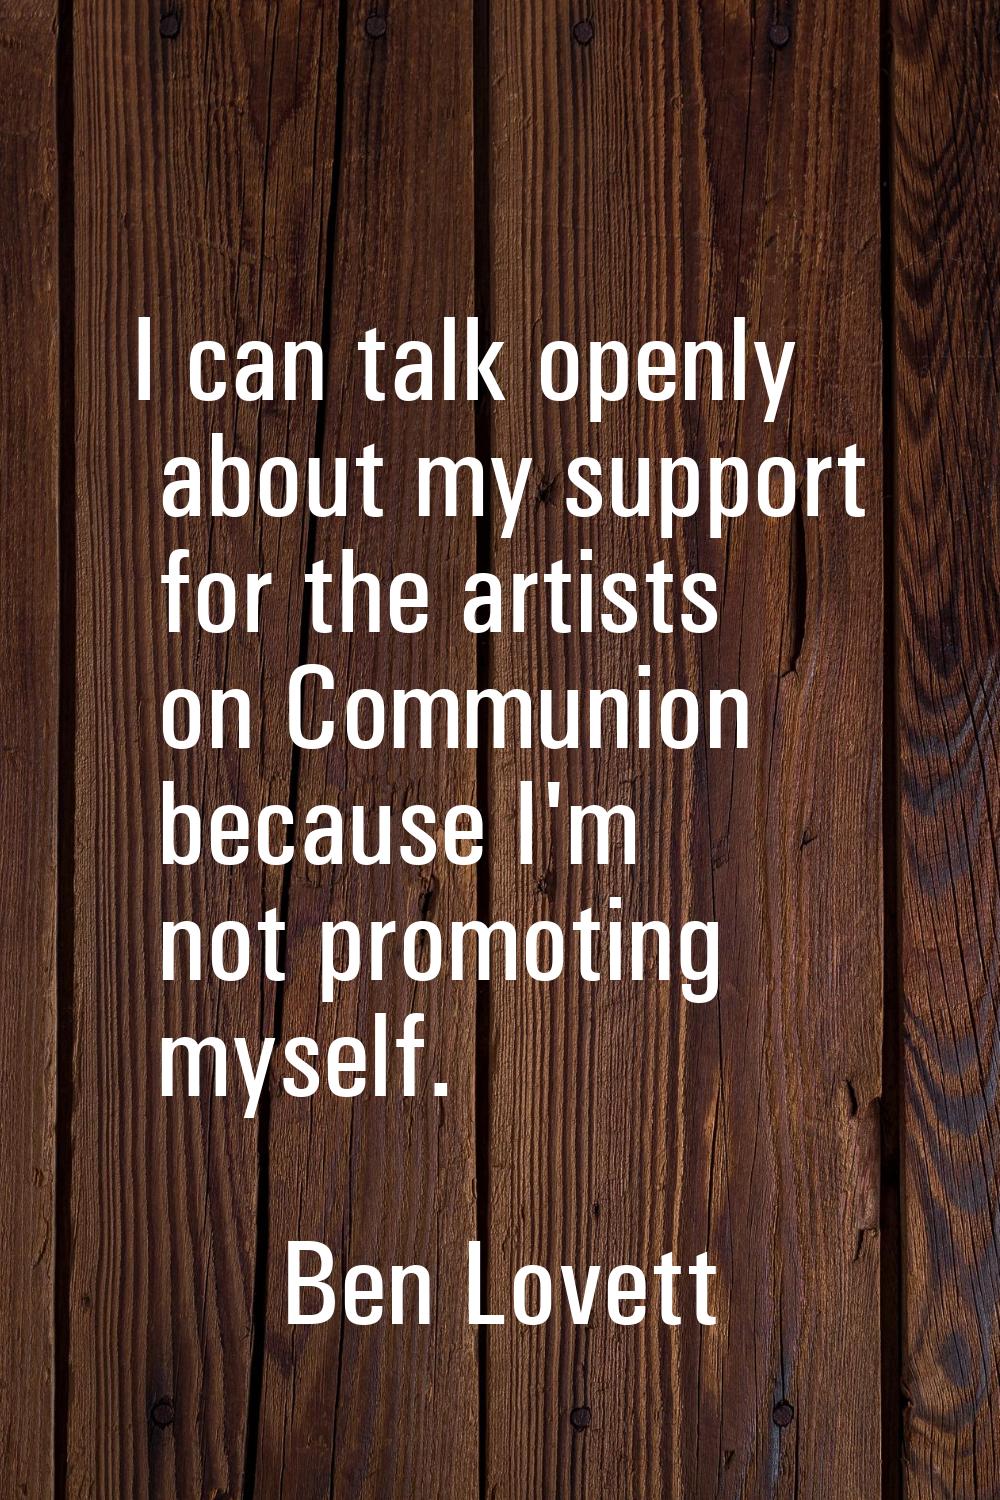 I can talk openly about my support for the artists on Communion because I'm not promoting myself.